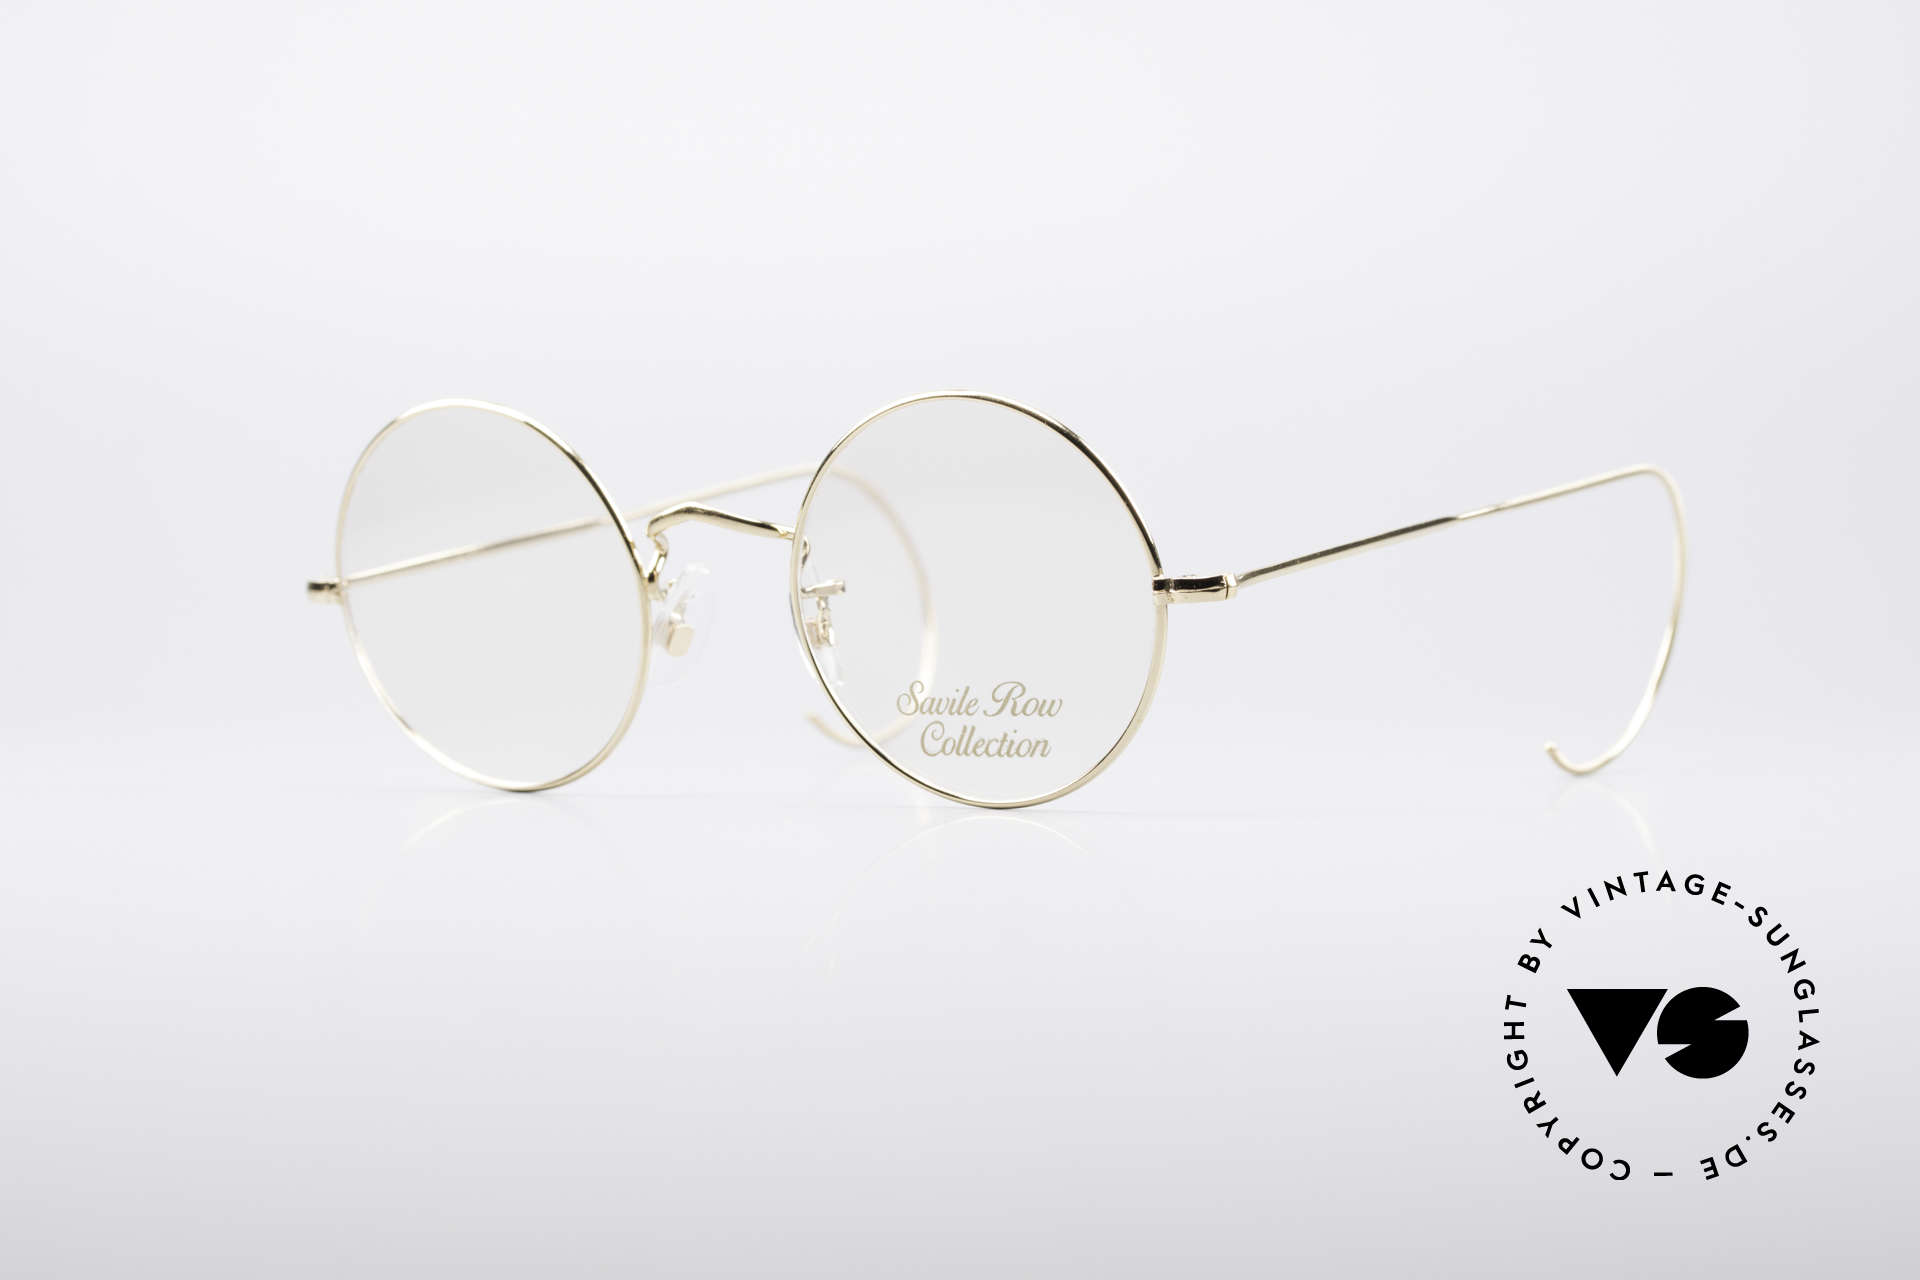 Savile Row Round 44/20 14kt Gold Frame, 'The Savile Row Collection' by Algha, UK Optical, Made for Men and Women